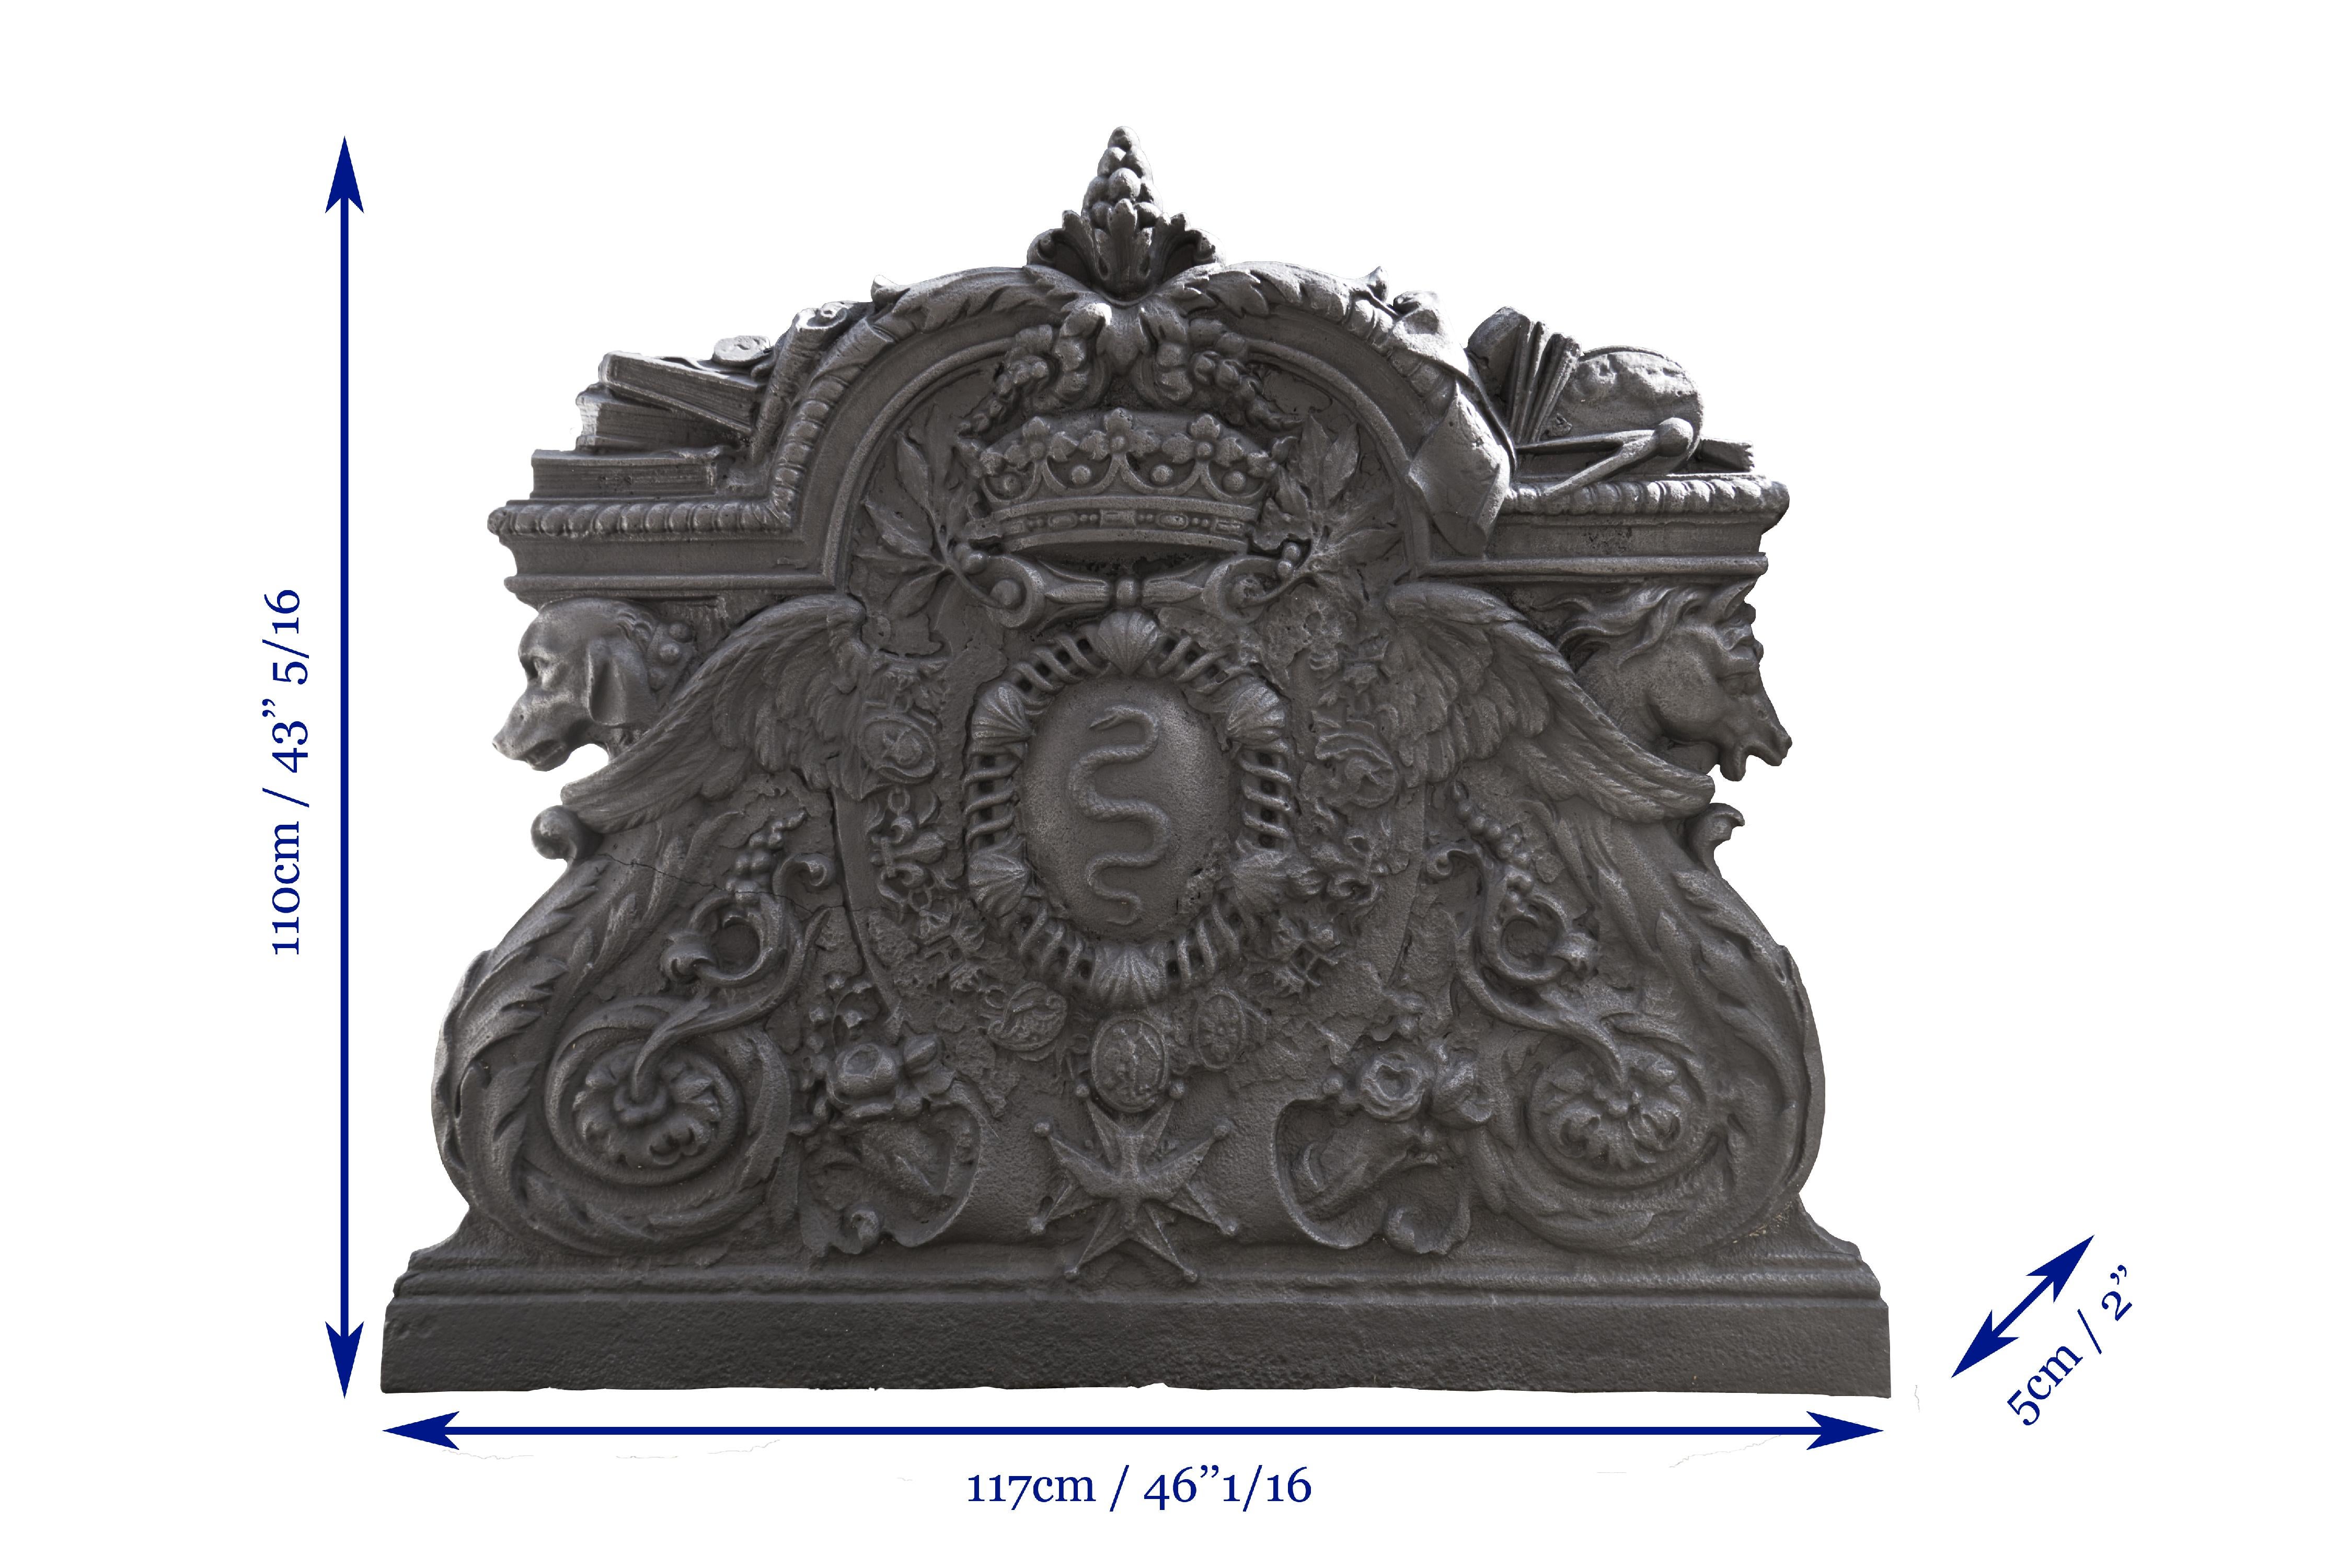 Cast iron fireback with the coat of arms of Colbert, marquis de Seignelay 6